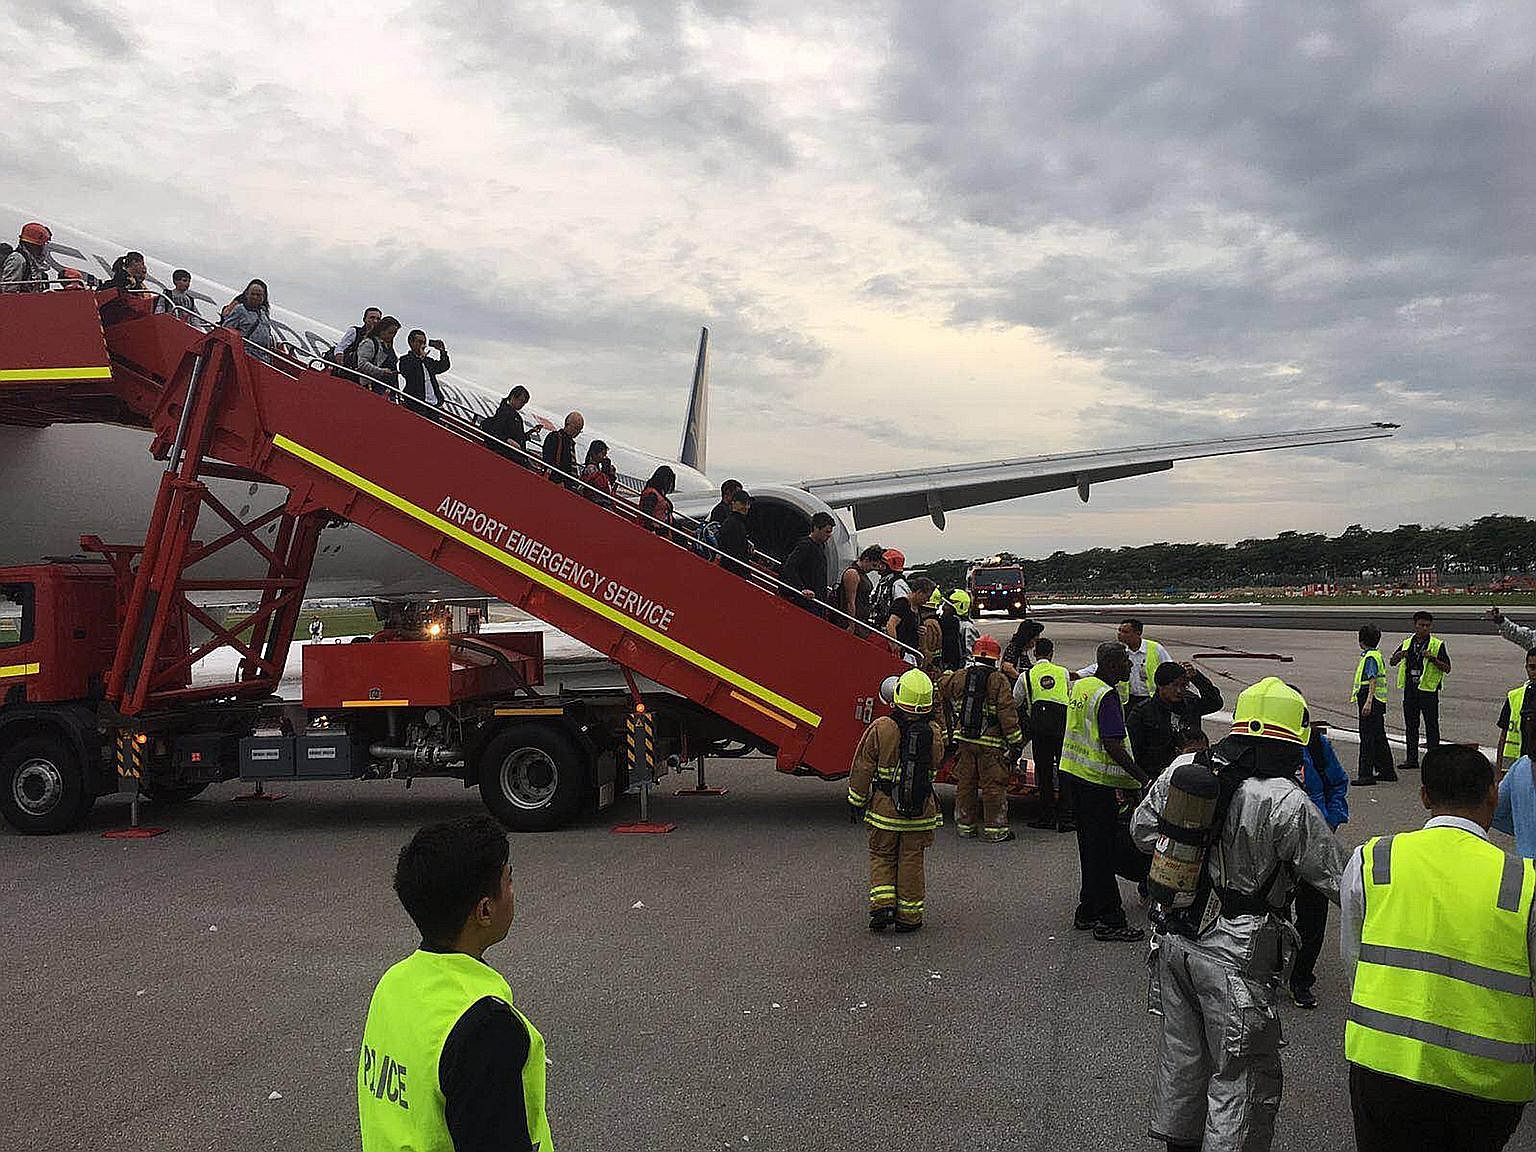 It took about five minutes for the fire on Flight SQ368's right wing to be put out, during which time passengers were kept on board. They were allowed to leave only after firefighters had put out the blaze.